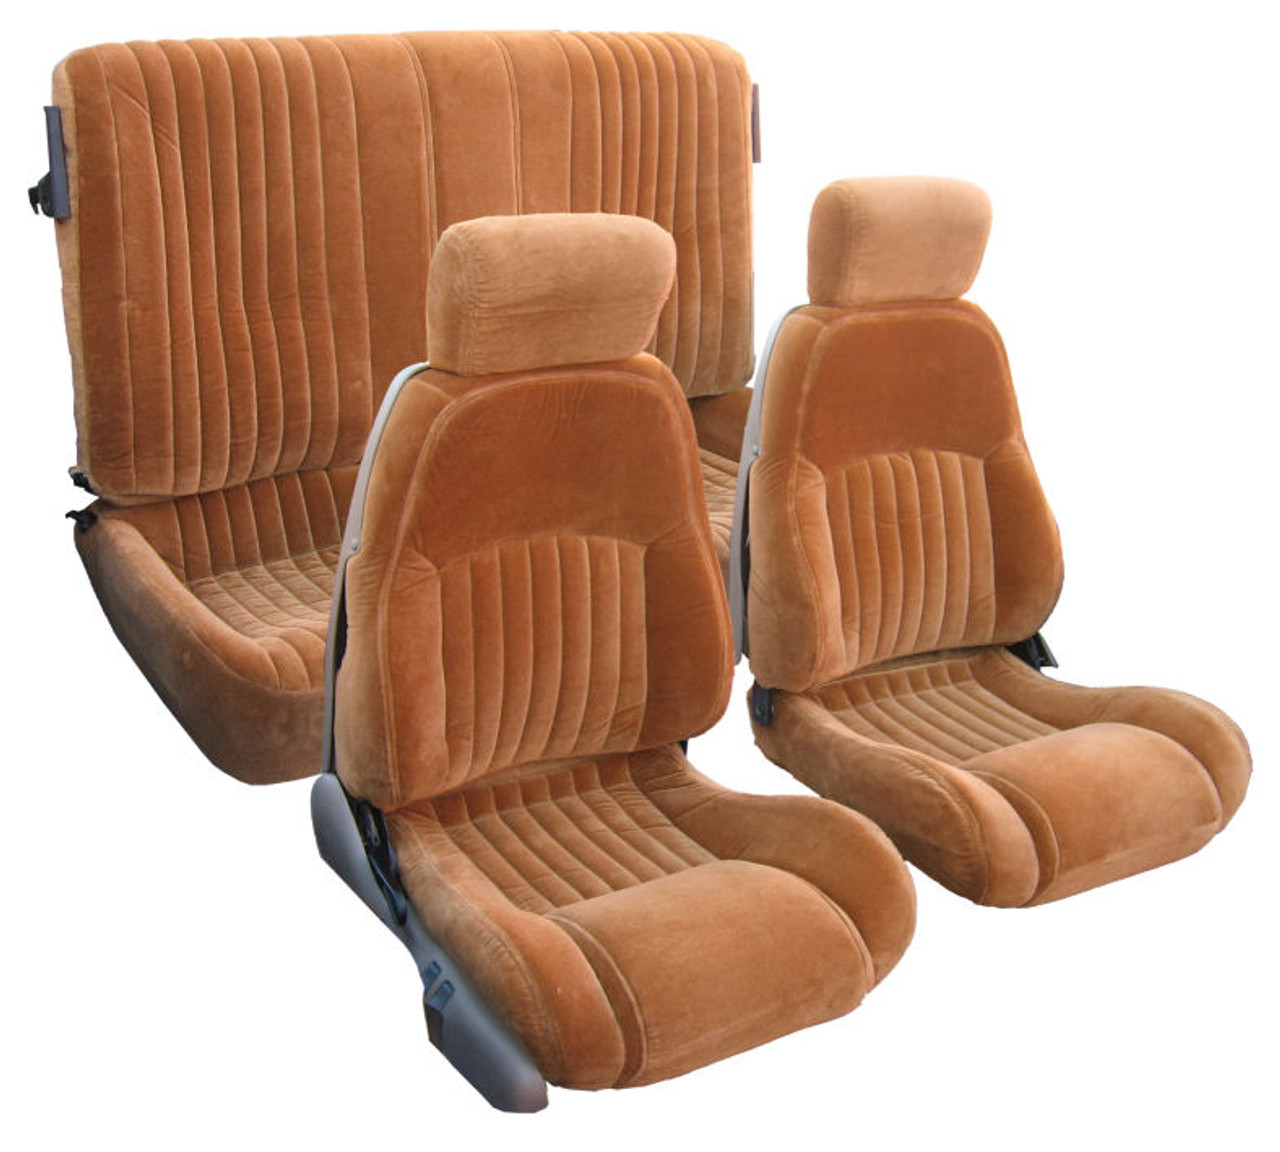 Velour Seats Fast Shipping